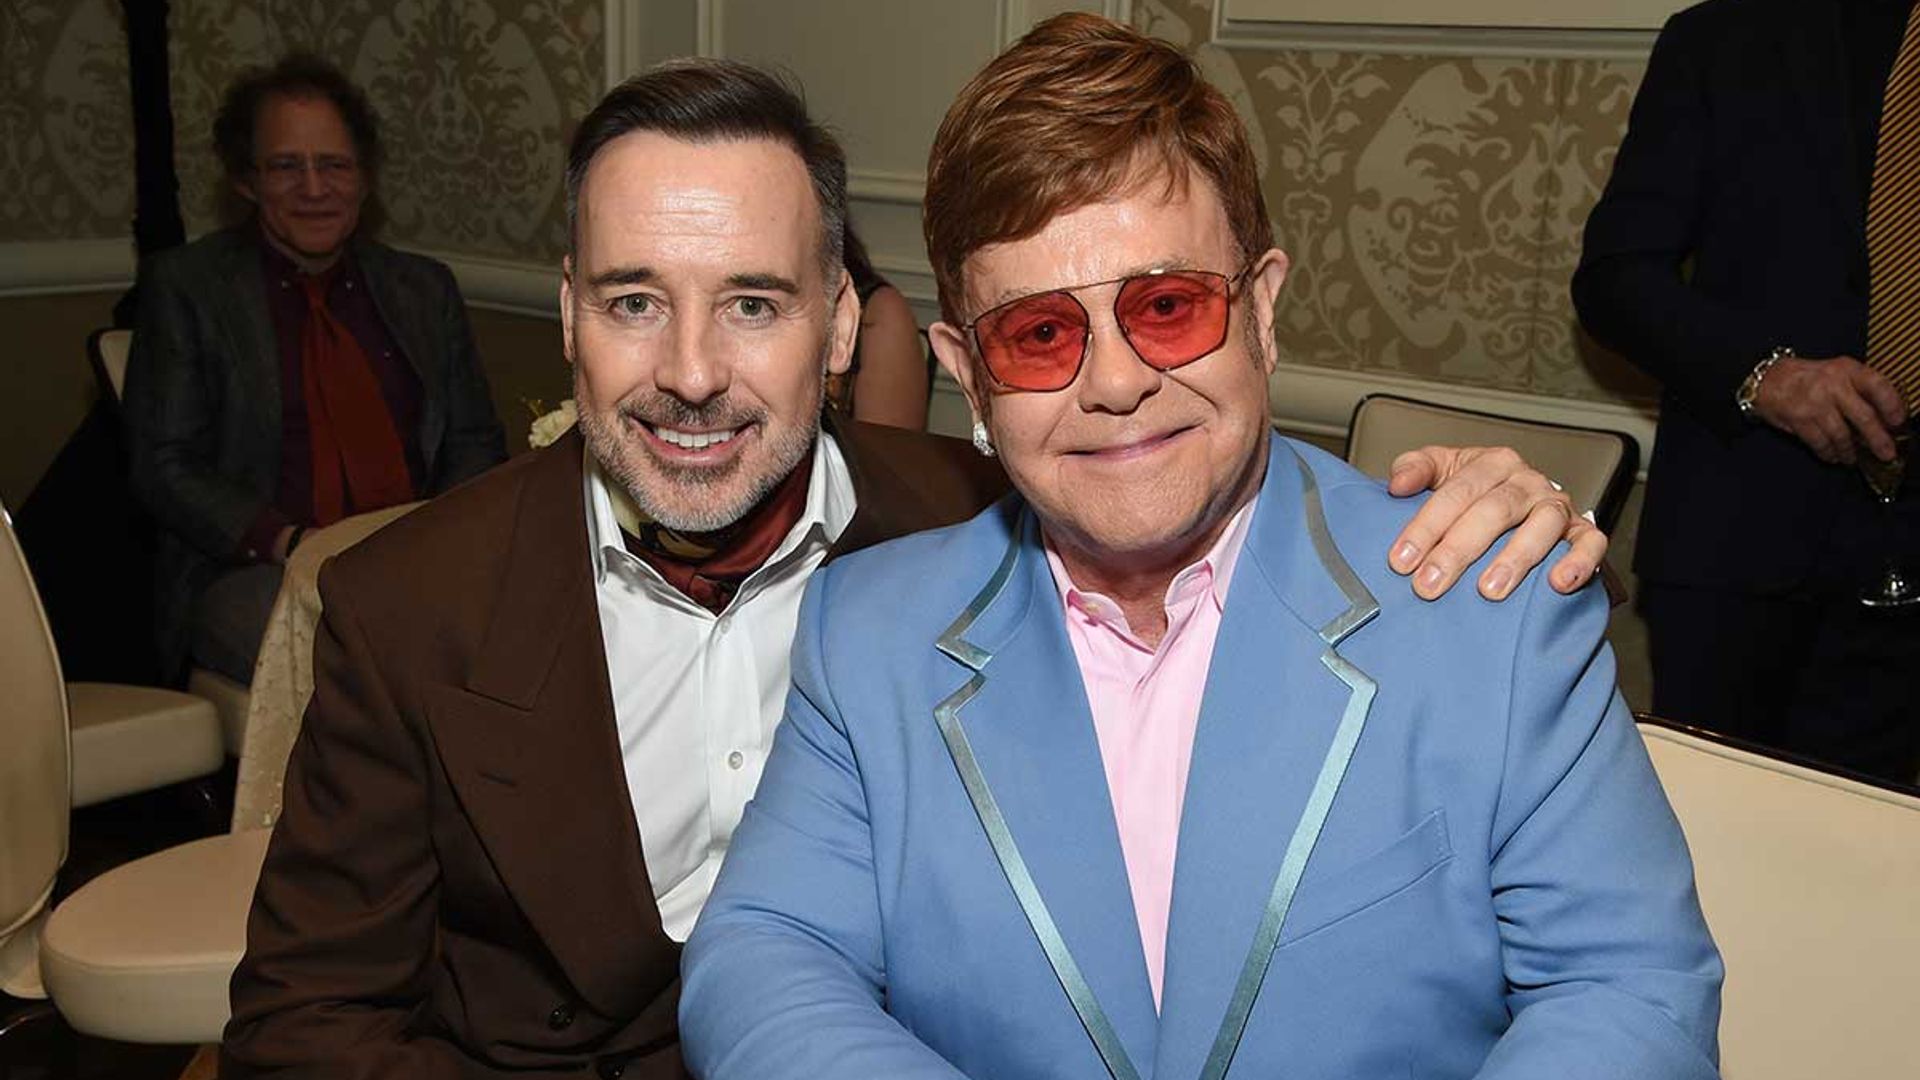 David Furnish gives update on Elton John's health as he isolates ahead of surgery - EXCLUSIVE